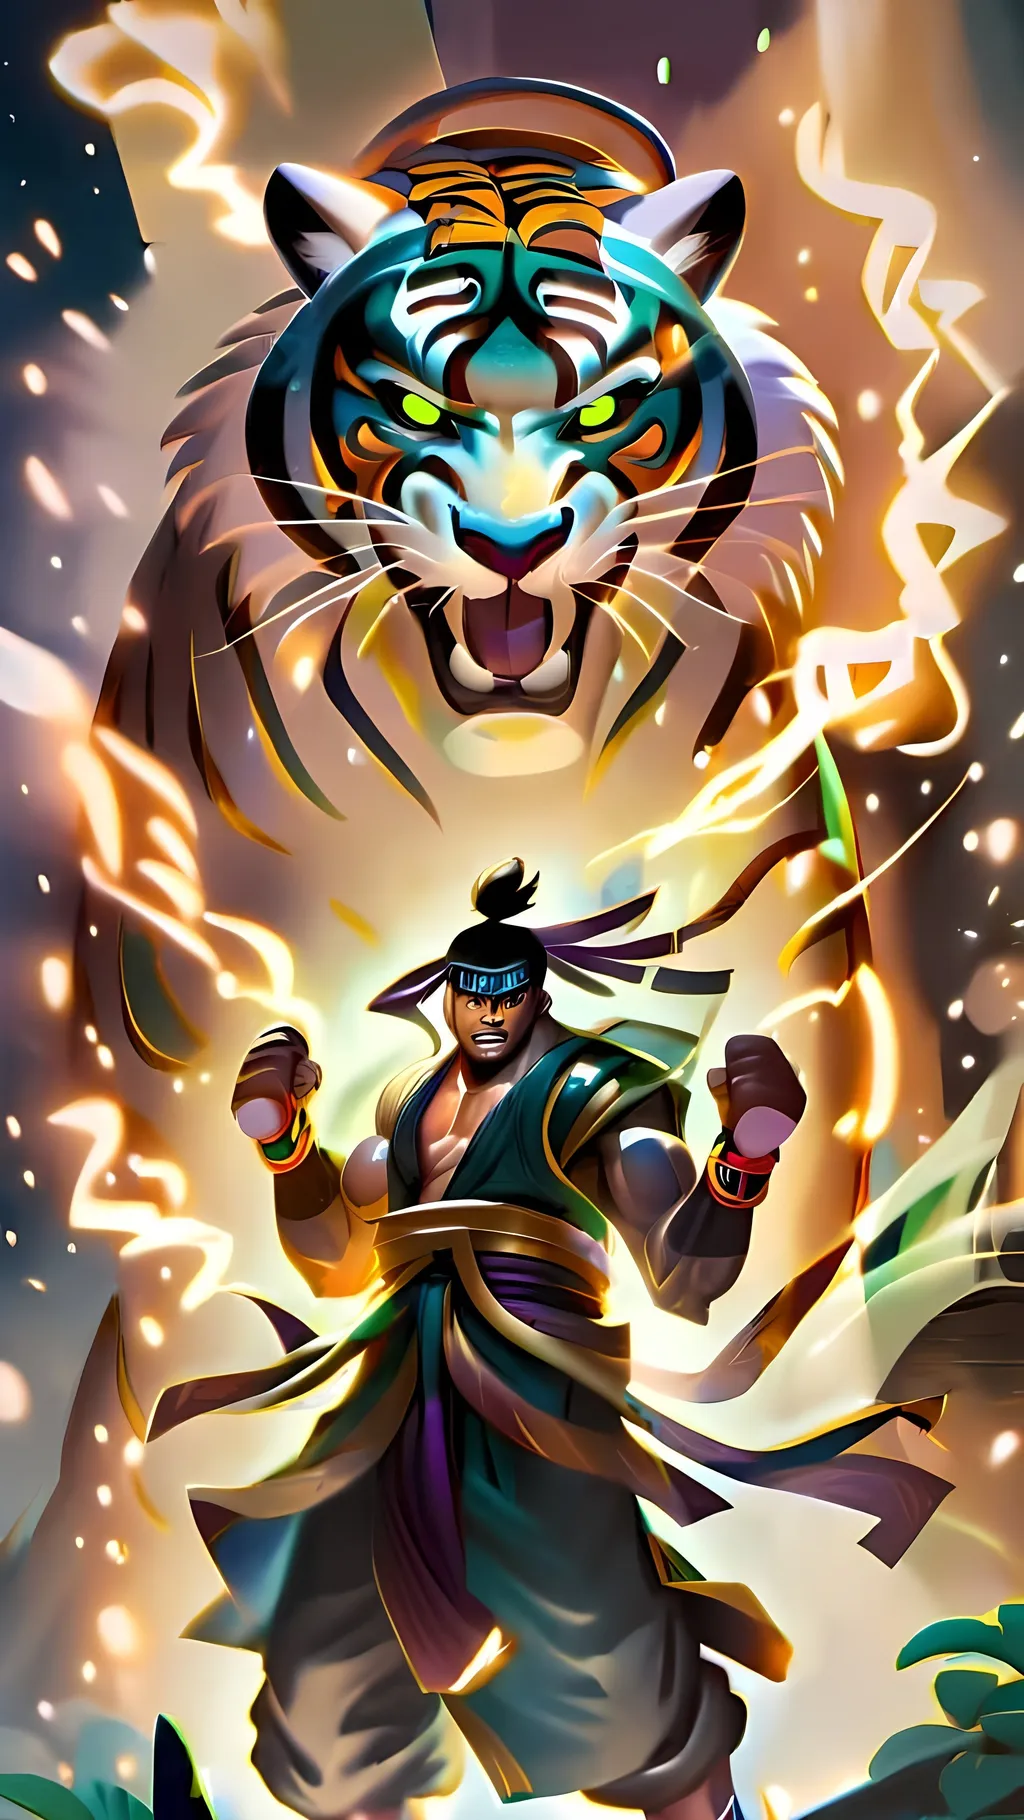 Prompt: (buakaw banchamek) (muy thai fighter) (punching) (surrounded by transparent glowing magical tiger spirit)
